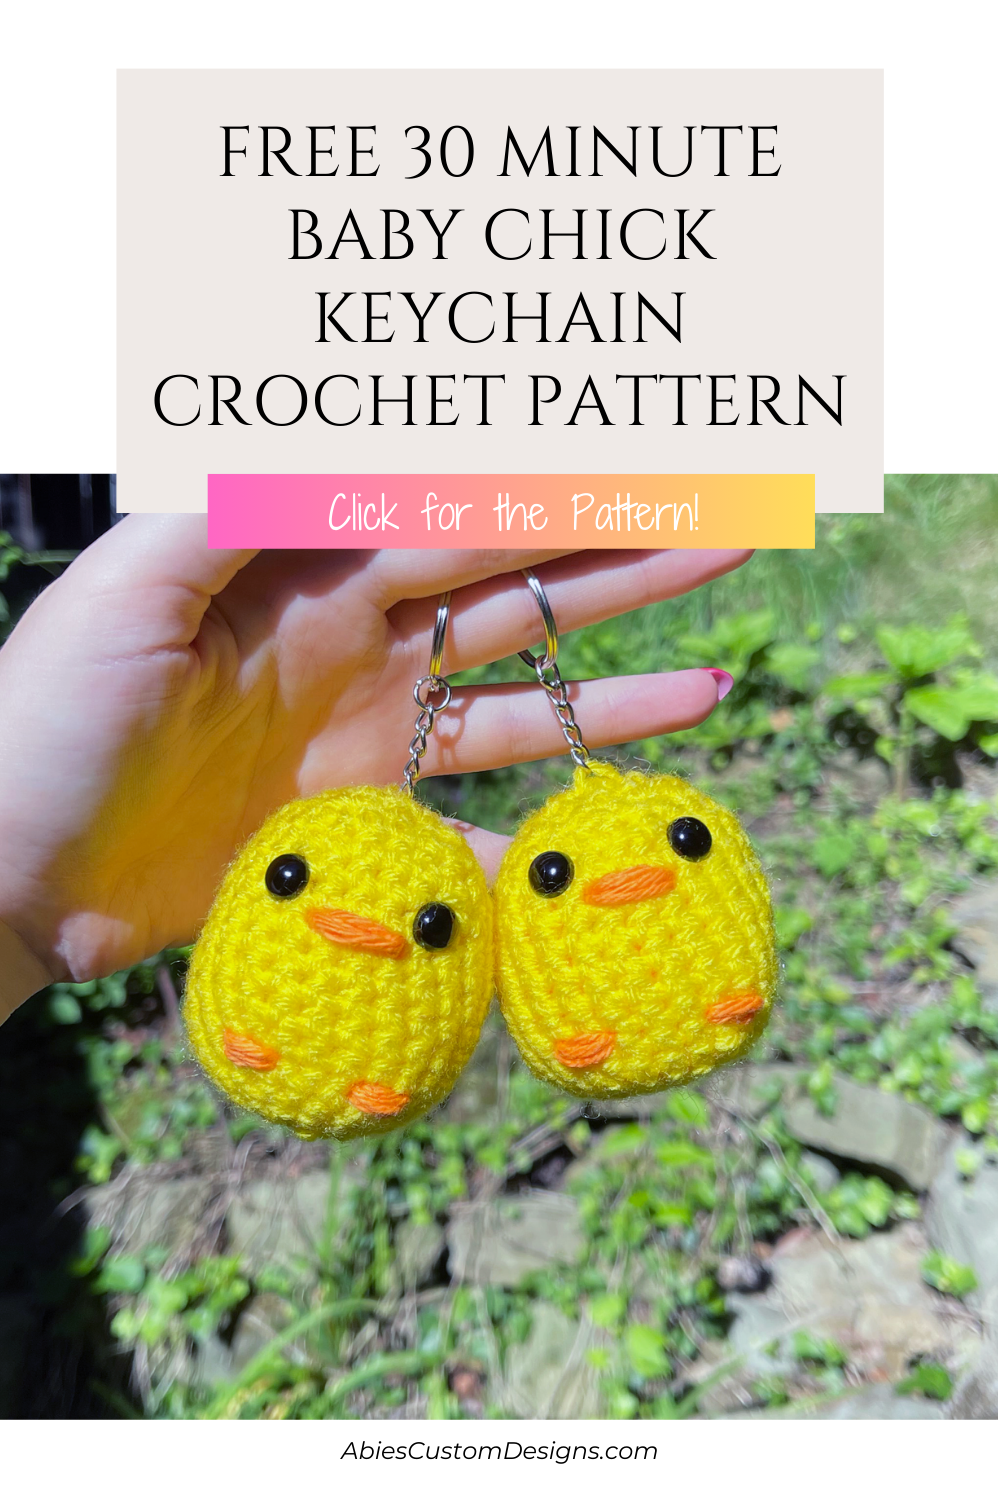 Free 30 Minute Baby Chick Keychain